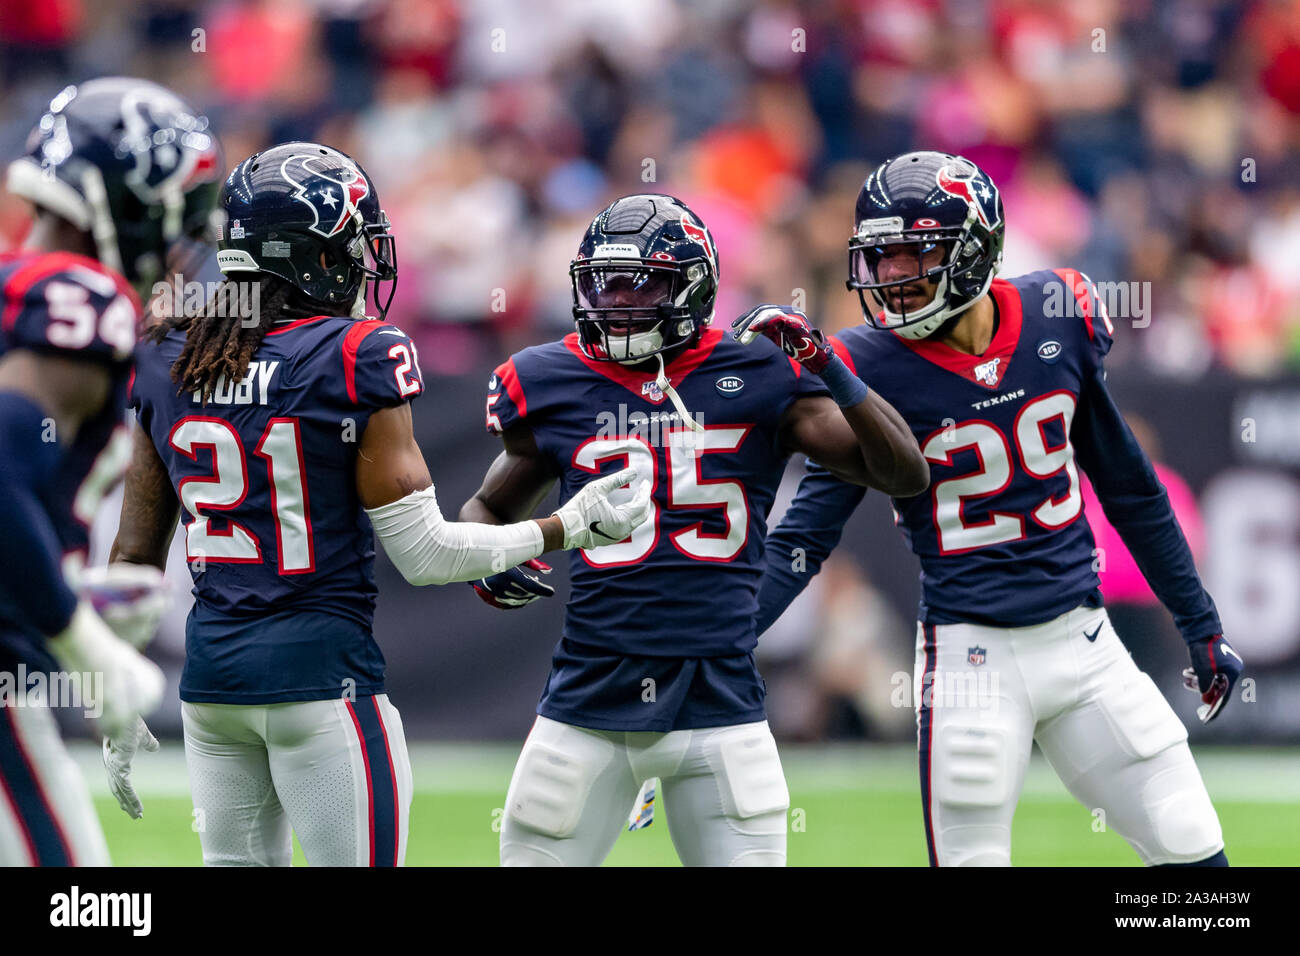 Houston, Texas, USA. 06th Oct, 2019. Houston Texans cornerback Phillip Gaines (29) and cornerback Bradley Roby (21) escorts defensive back Keion Crossen (35) way from an Atlanta Falcons player during the game between the Atlanta Falcons and the Houston Texans at NRG Stadium in Houston, Texas. Texans win 53-32. Maria Lysaker/CSM/Alamy Live News Stock Photo